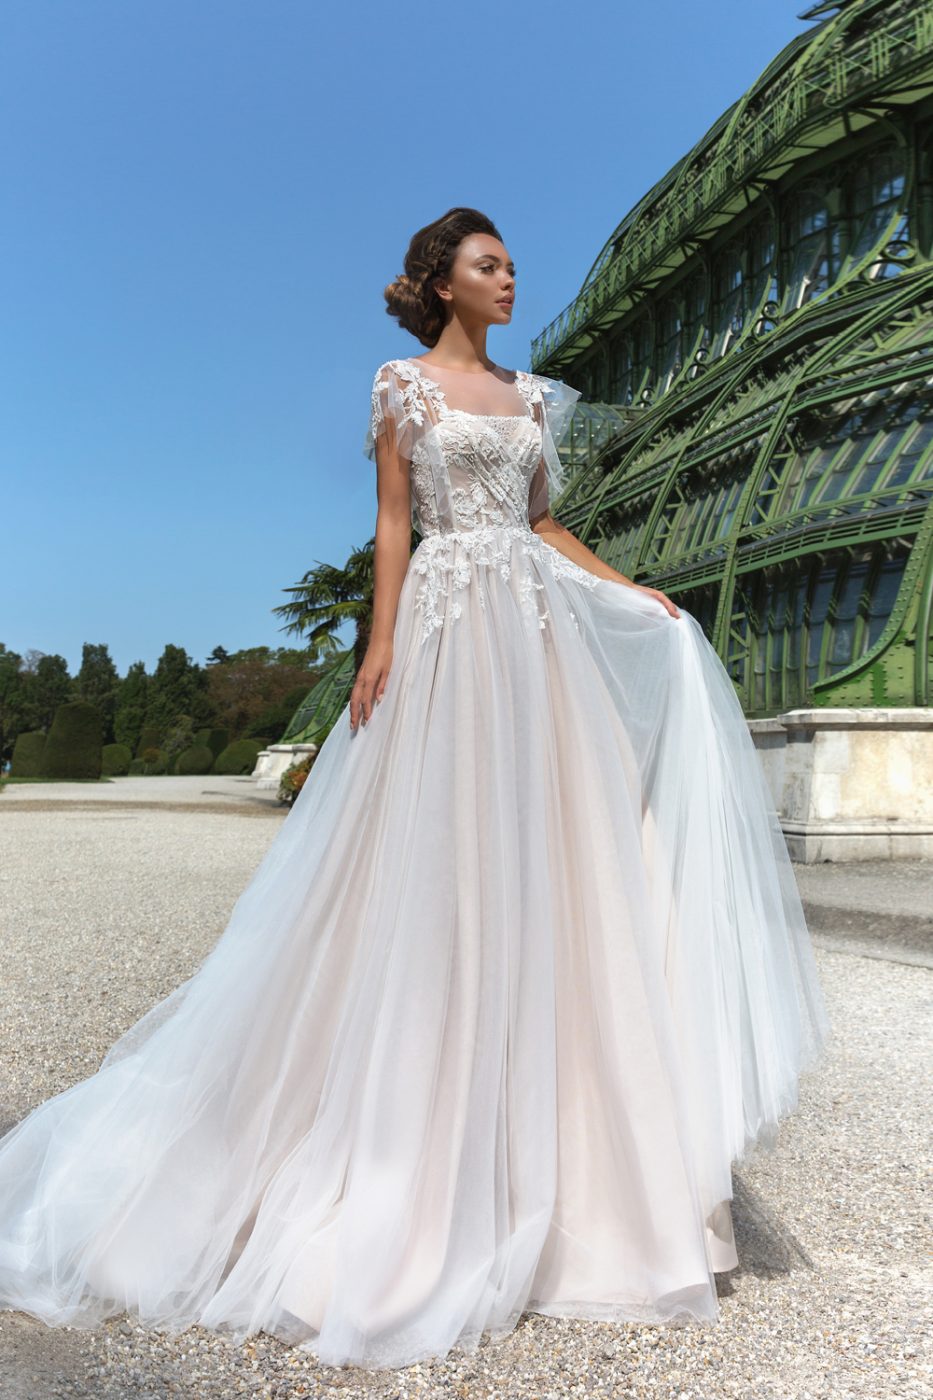 illusion flutter sleeve wedding dress by Crystal Design Couture